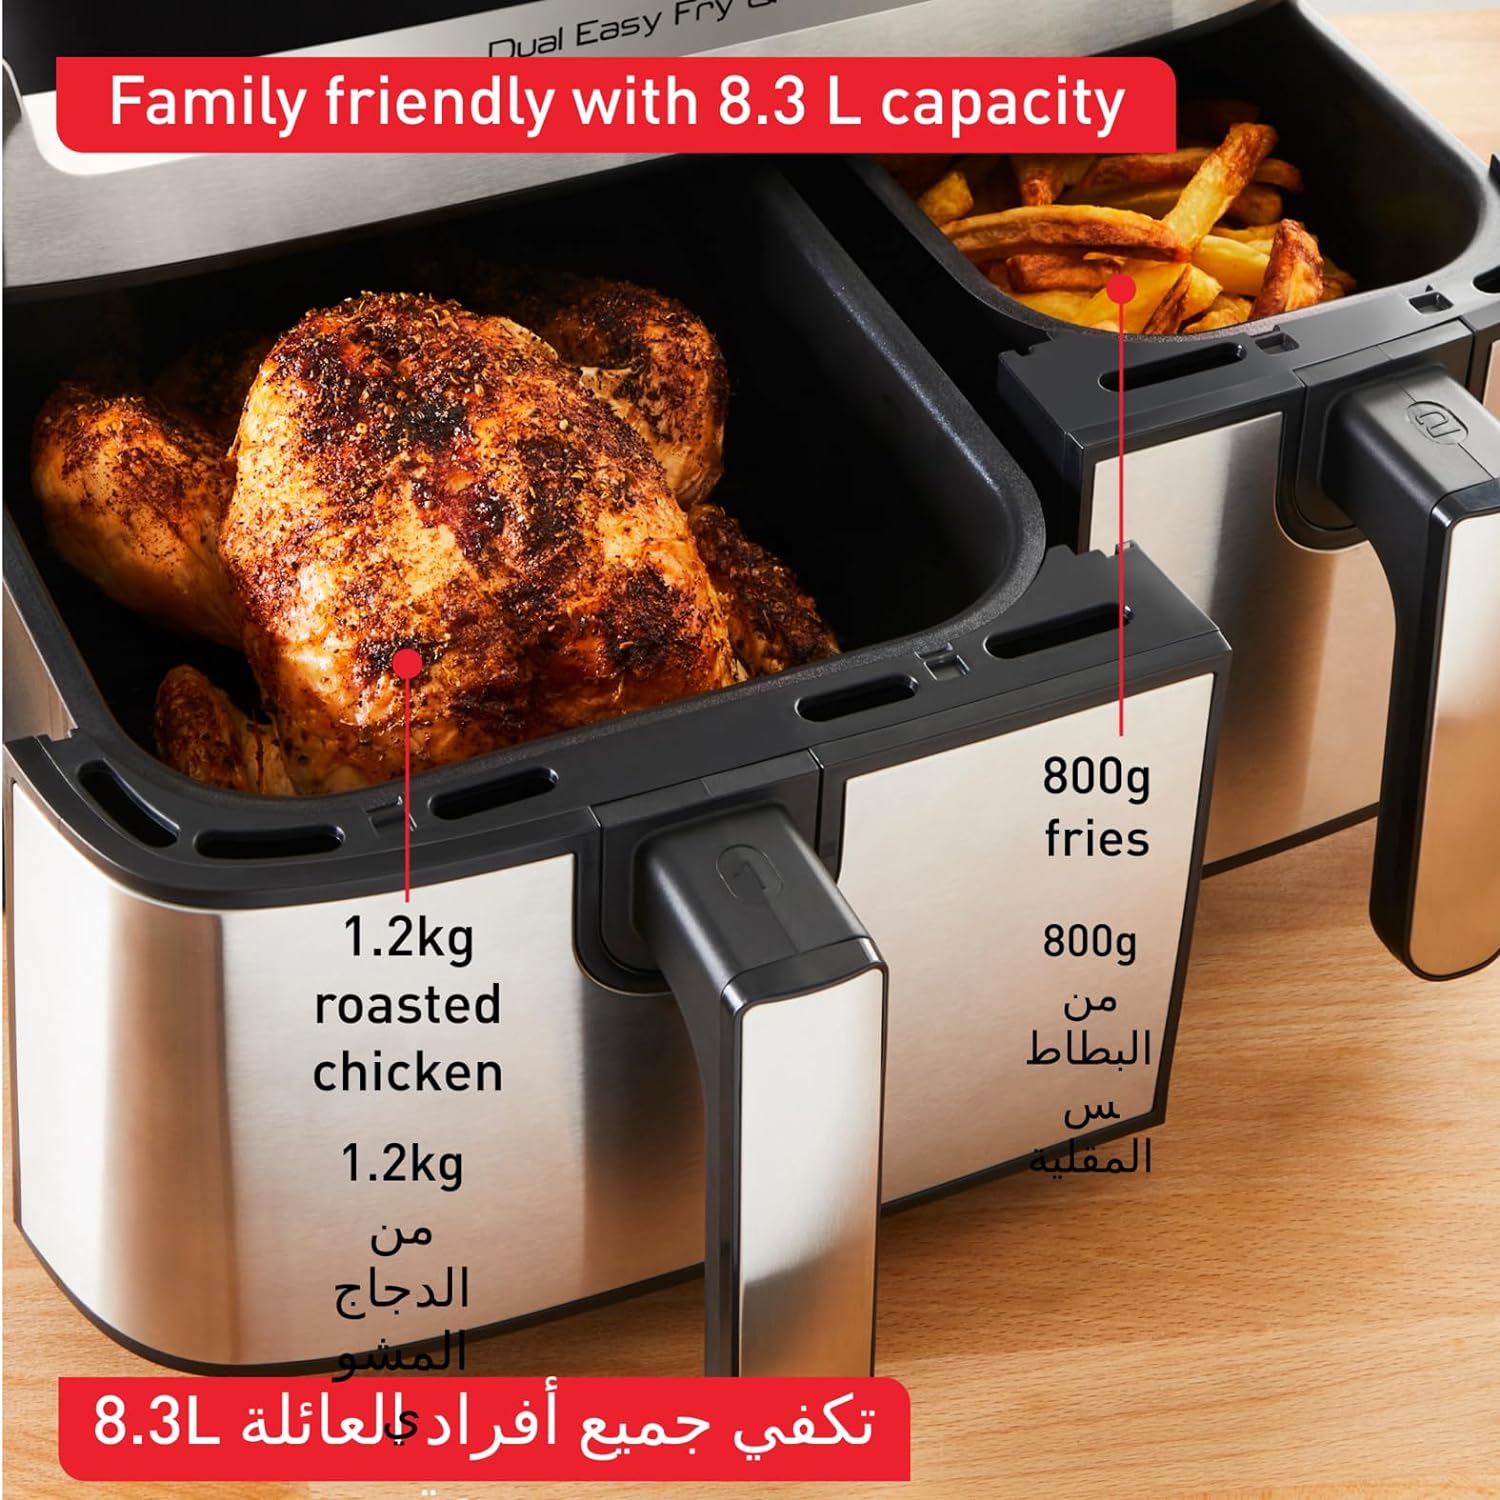 Tefal Air Fryer 0.8Kg/4.2L Capacity to Fry, Bake, Grill and Roast - 60Hz Only - EY201827